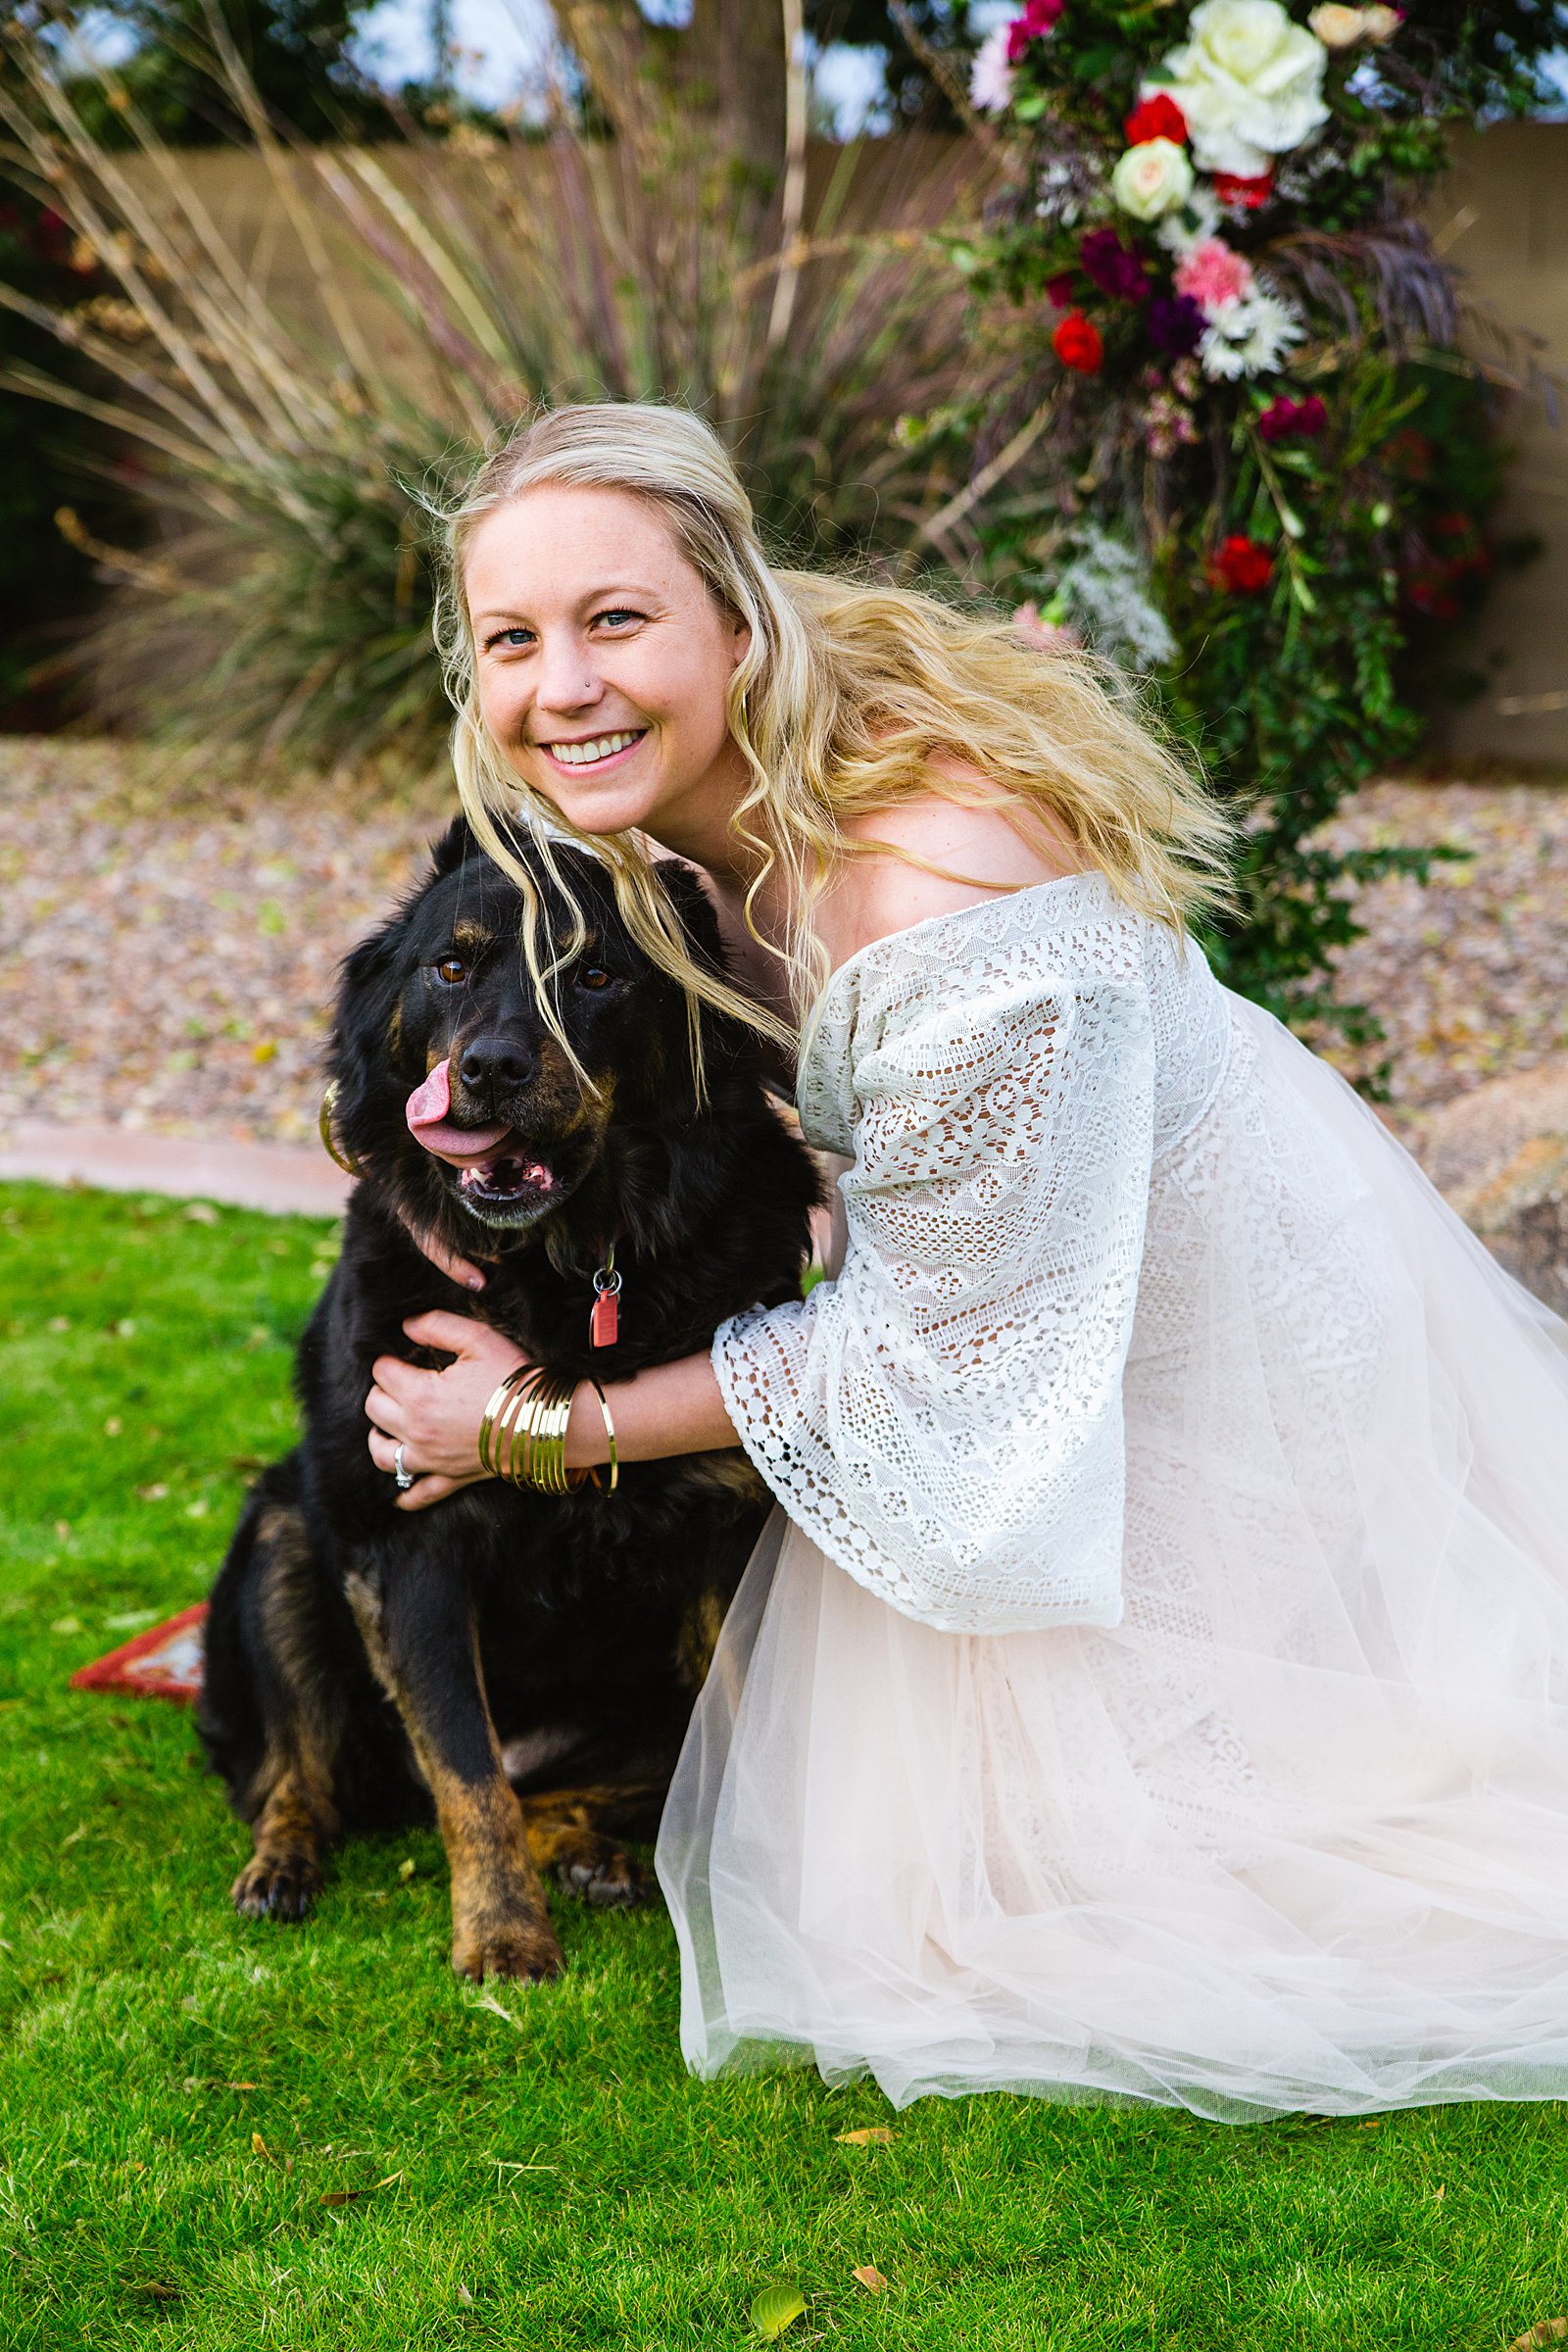 Bride poses with her dog for their Backyard wedding by Phoenix wedding photographer PMA Photography.